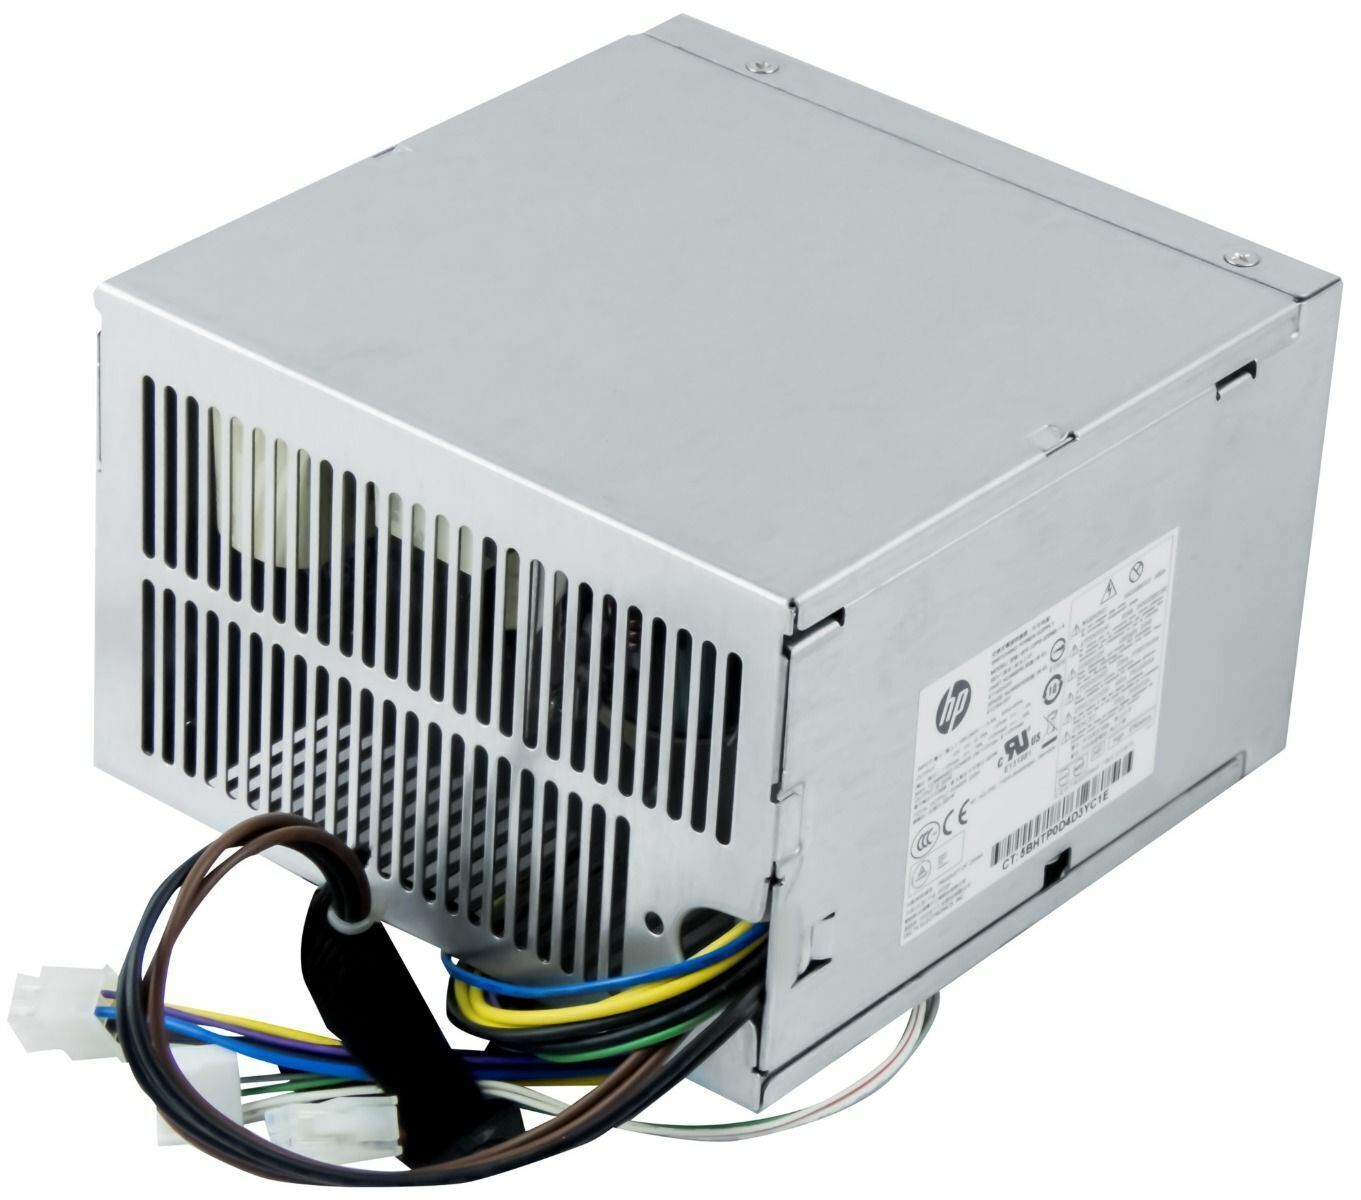 New For HP 6200 6380 8080 8200 8300 MT 320W Power Supply 611483-001 613764-001